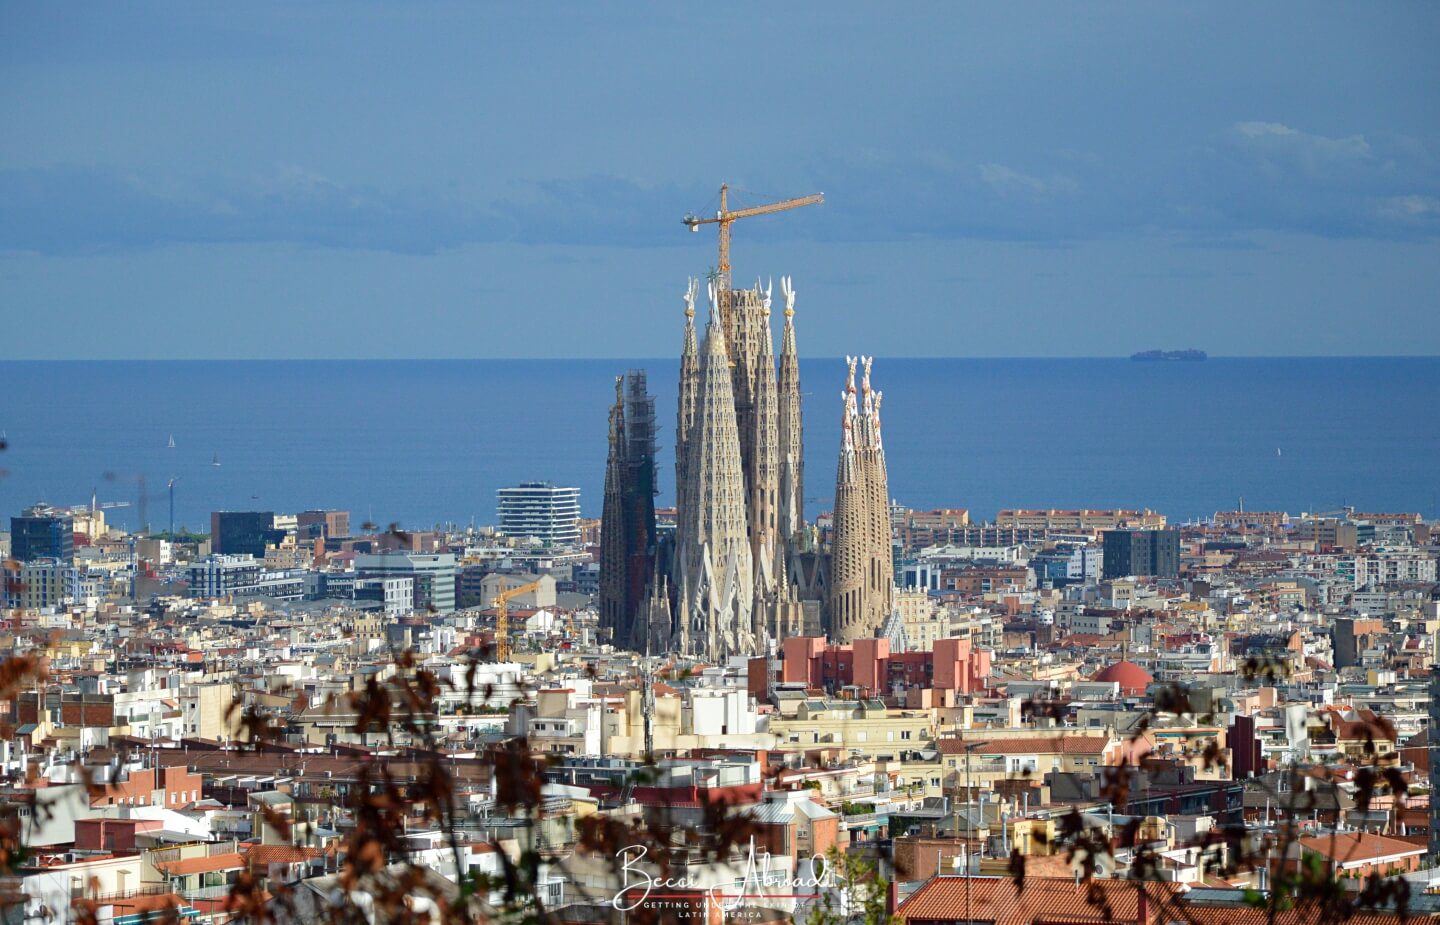 Sagrada Familia - The 20 Most Popular Places to Visit in Barcelona